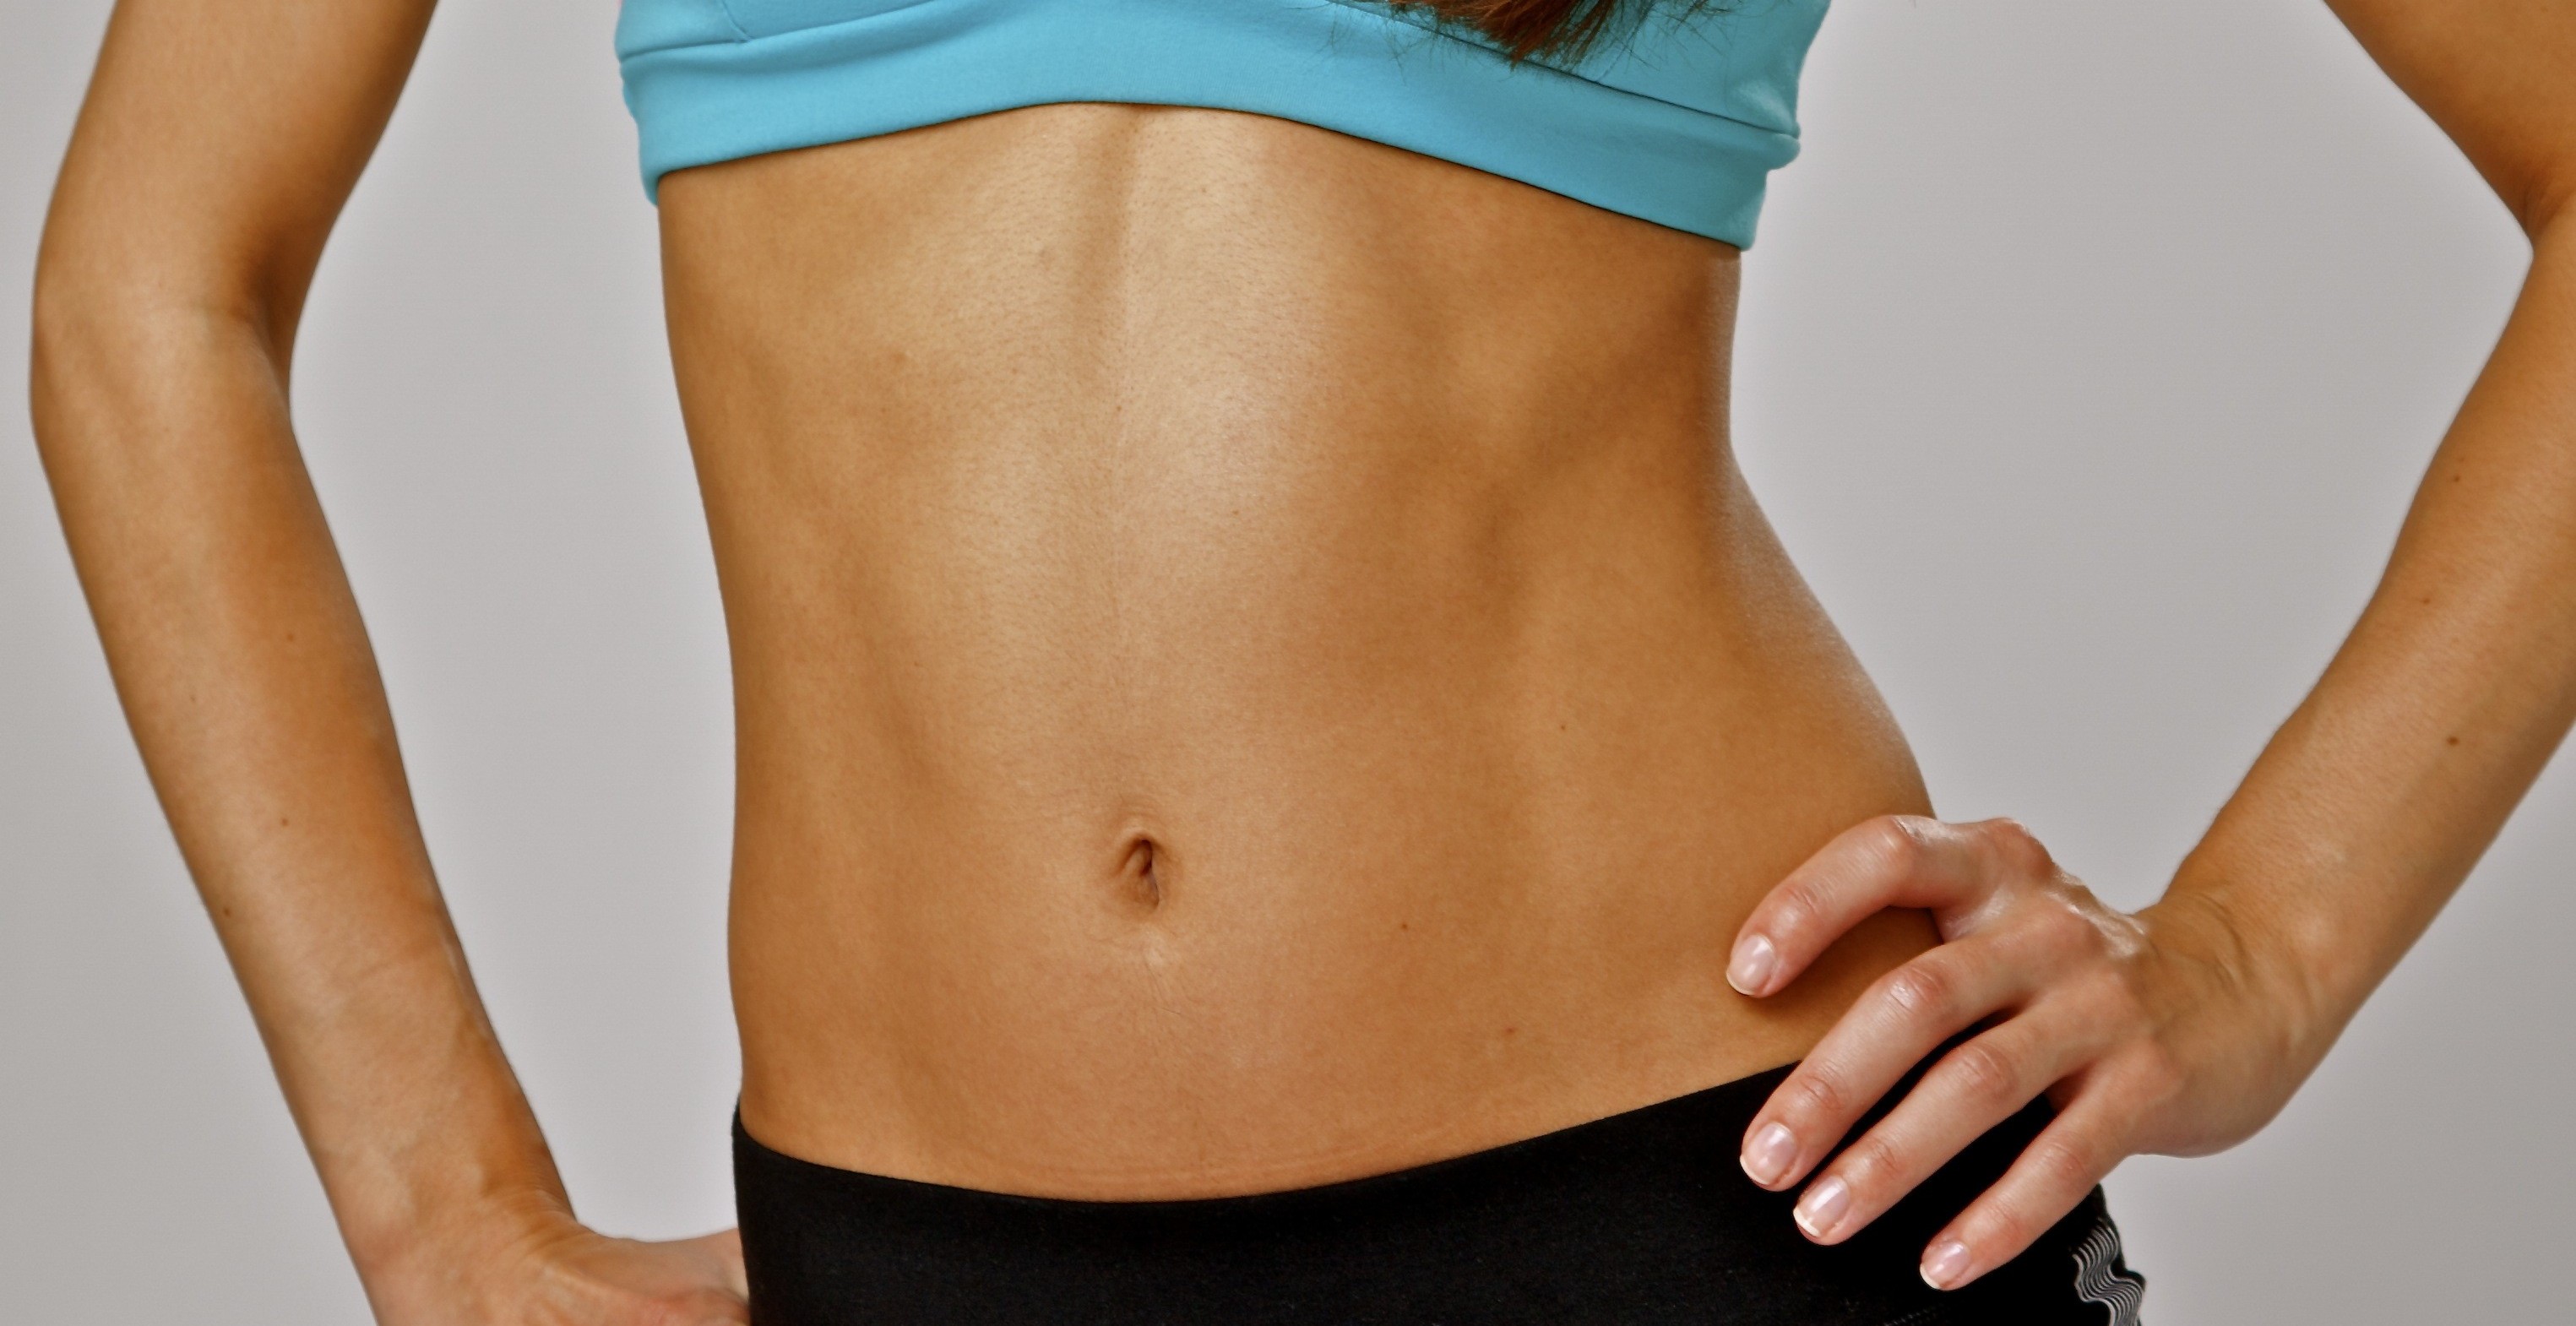 How To Reduce Bloating, Get Flat Stomach